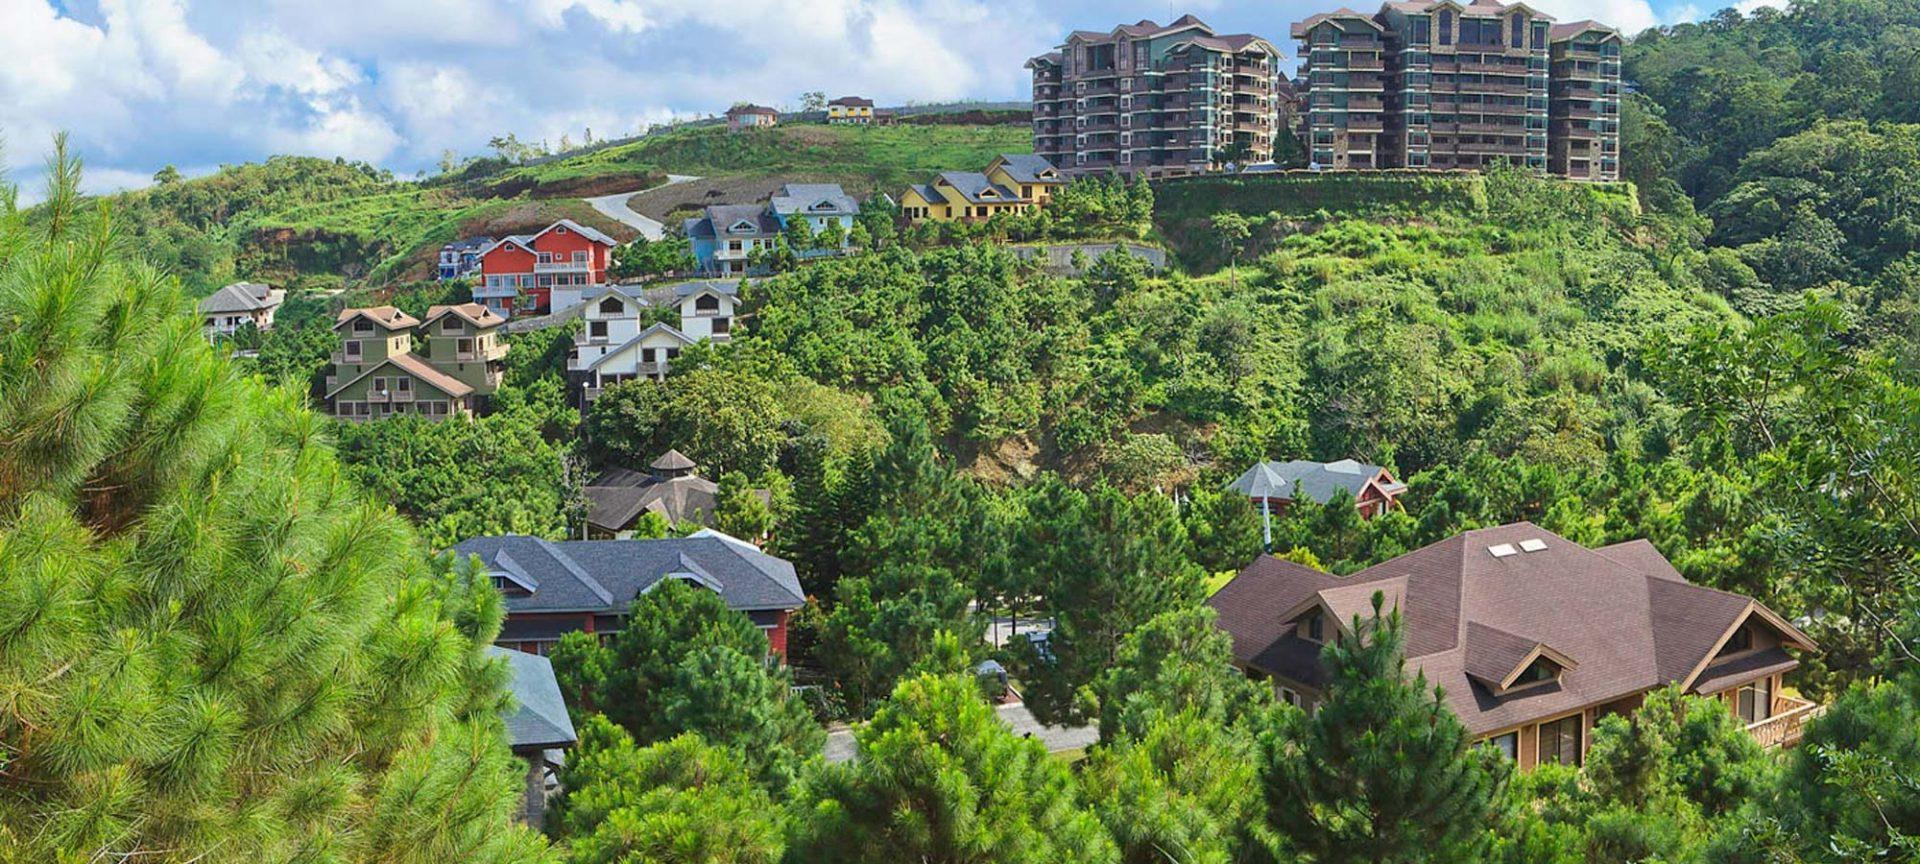 Luxury houses and condominiums at Crosswinds Tagaytay